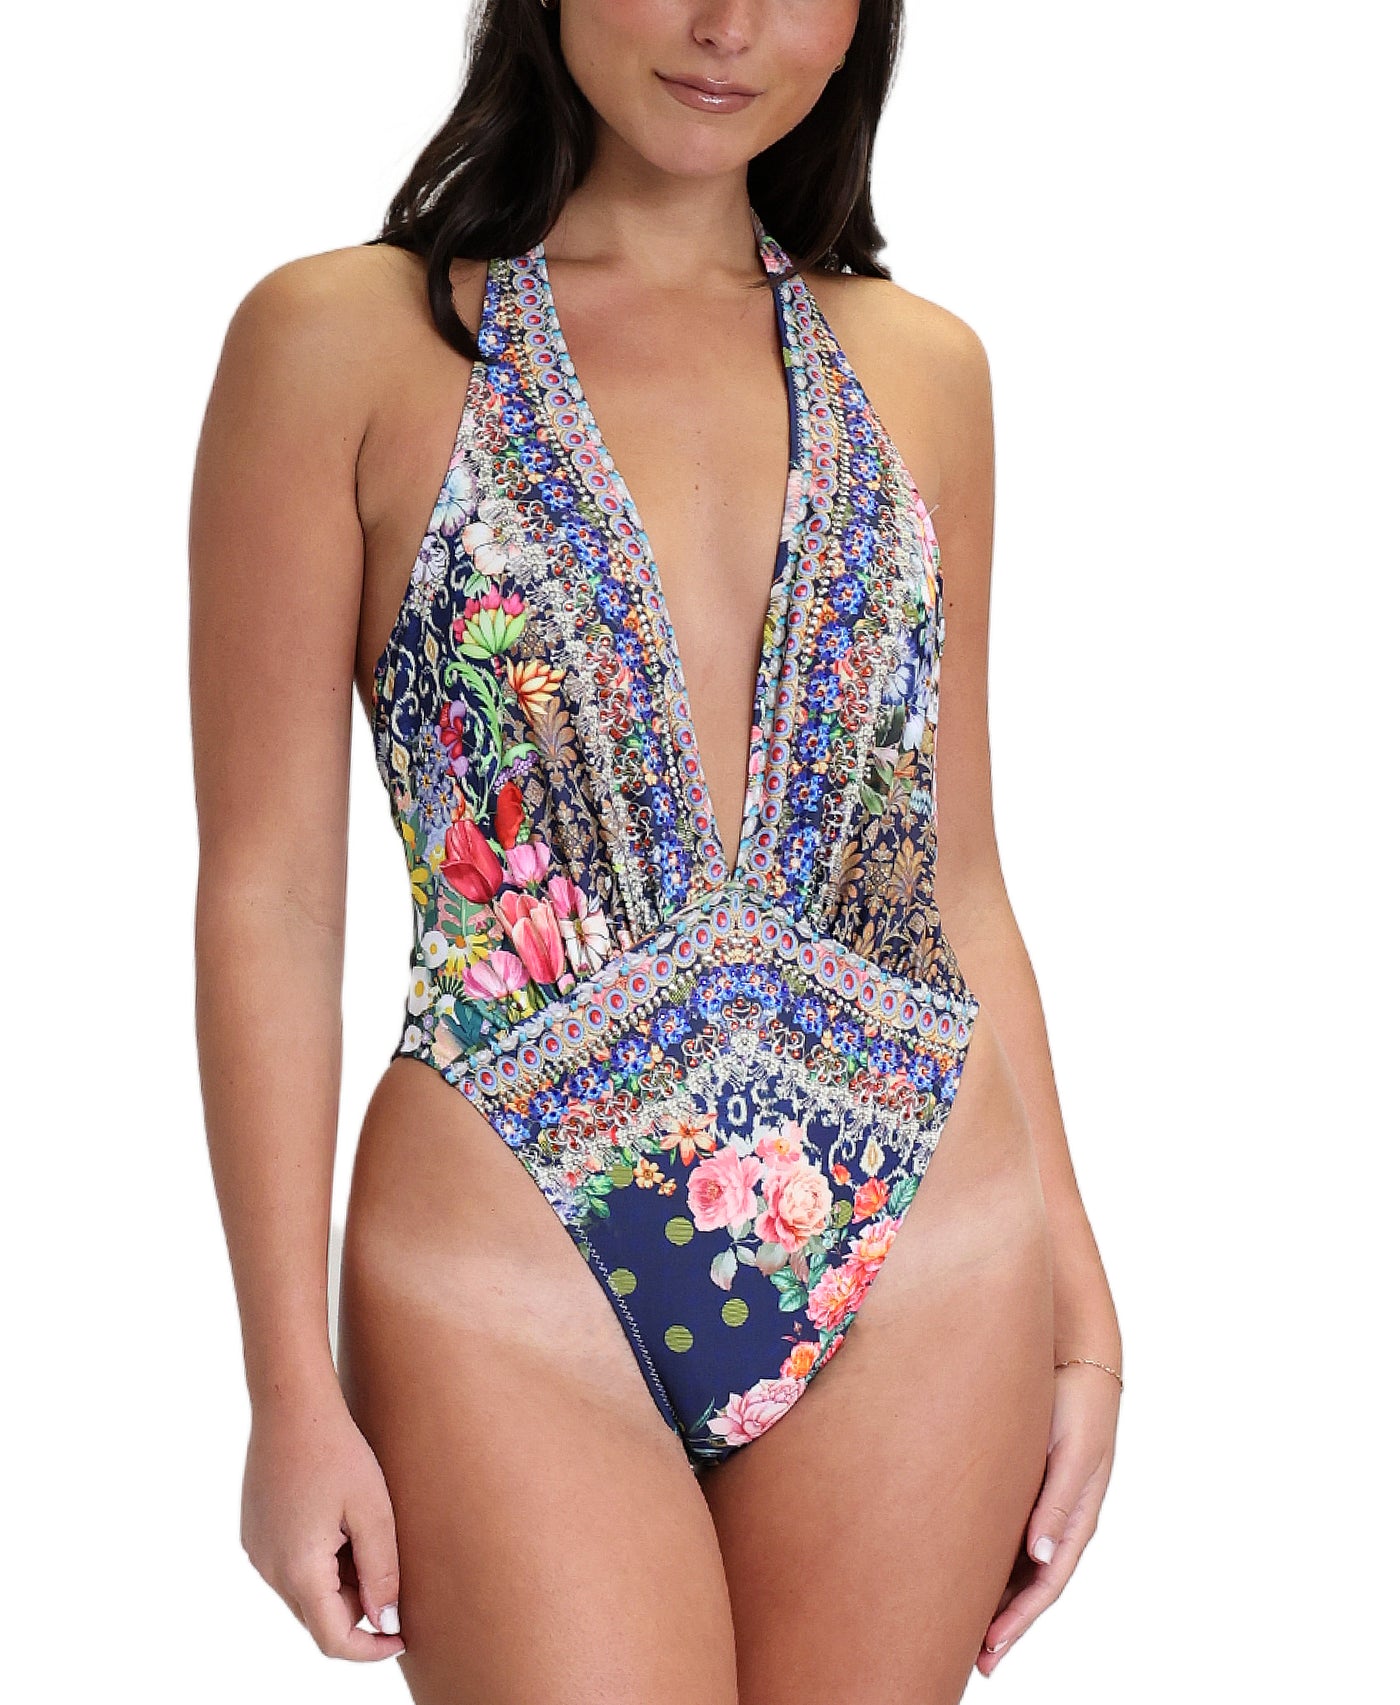 Floral Print One Piece Swimsuit image 1